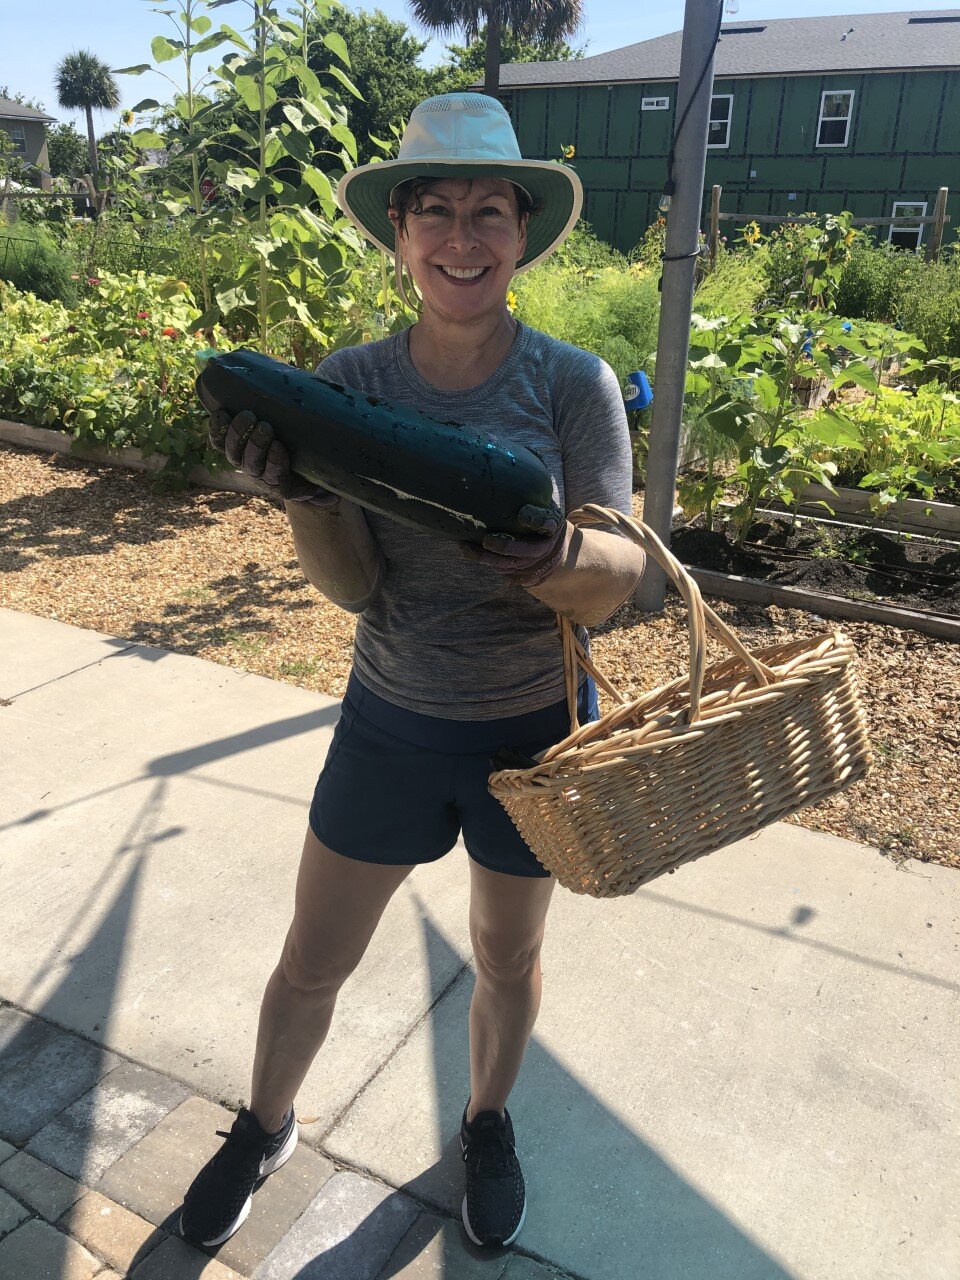 Volunteer Jodi stumbled upon this beauty while harvesting produce in BEAM's&nbsp;Grace Garden. The zucchini weighed more than three pounds and was given the same day to a Jax Beach Food Pantry client in need of groceries for her young family.